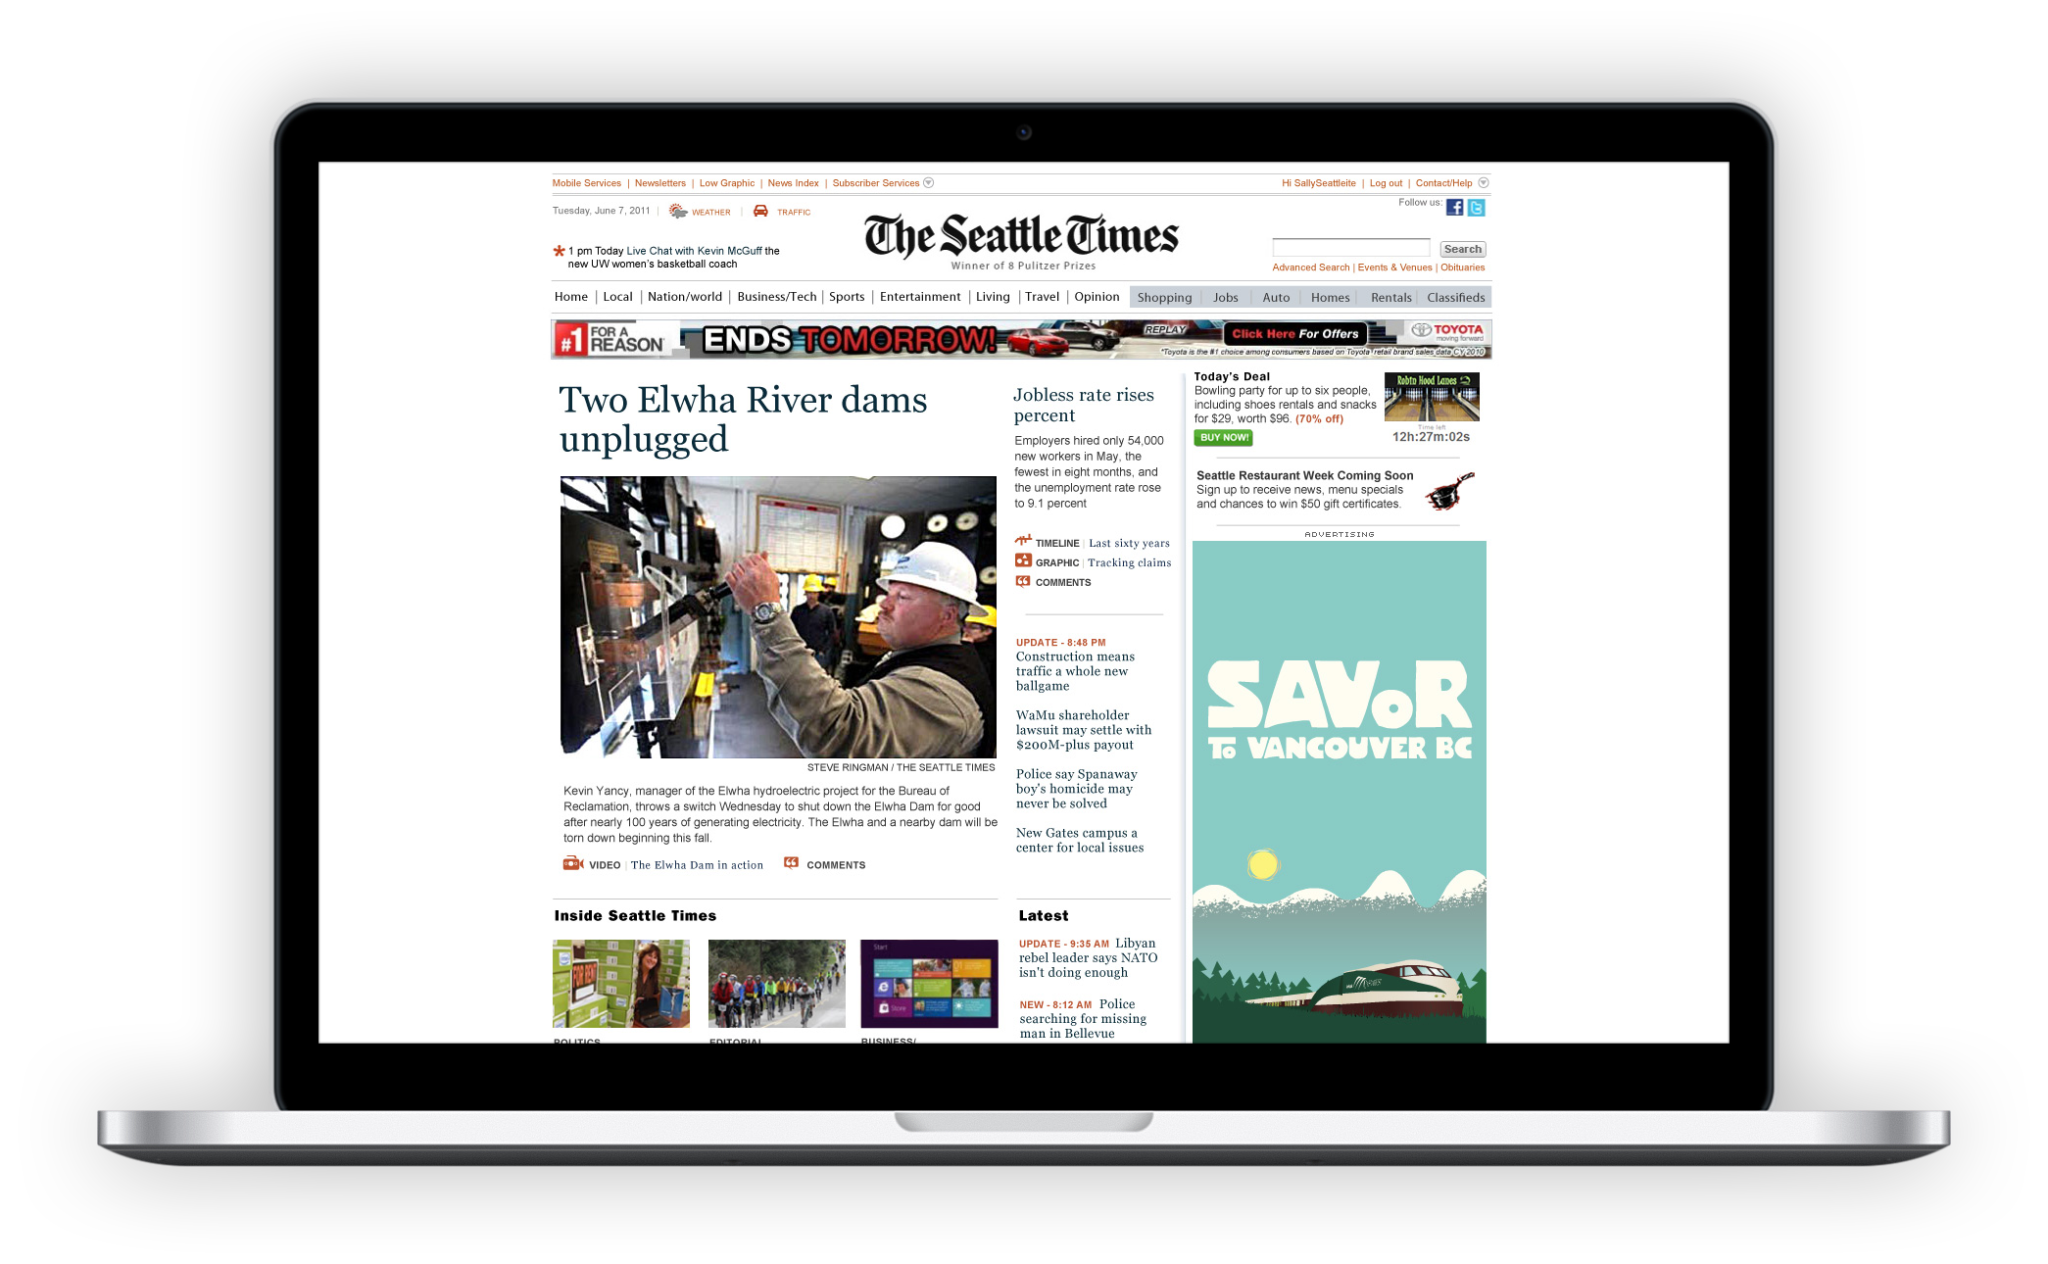 The Seattle Times homepage redesign in 2011 Angela Giese